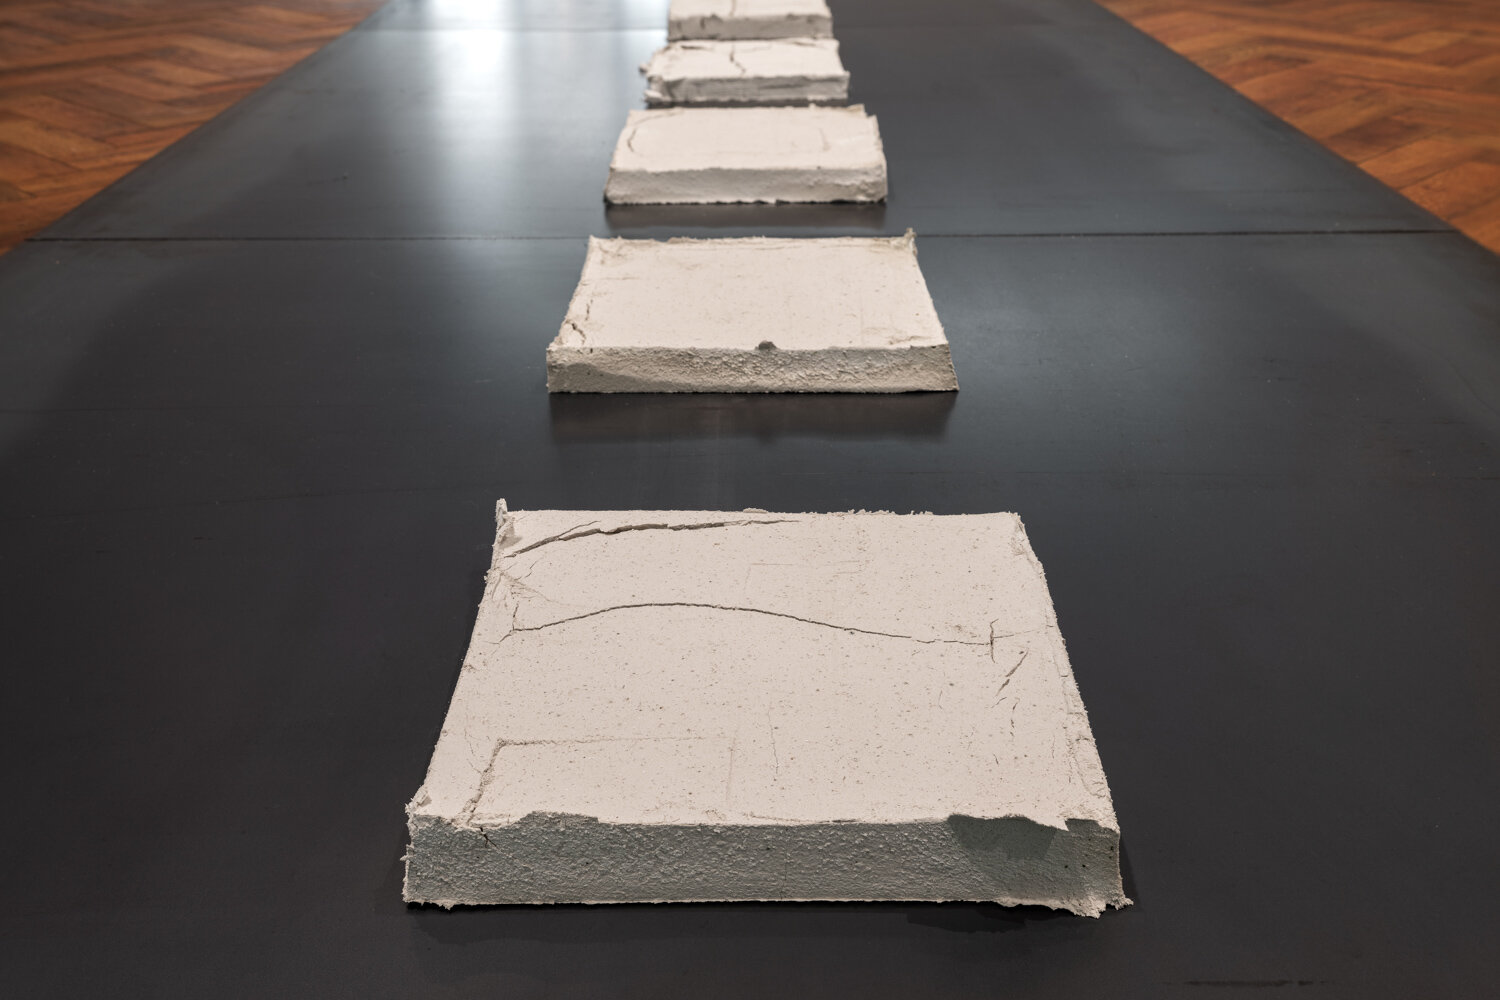  ‘The Track’ (2020). Calcium Oxide (Quicklime) tiles, stainless steel 10 x 720 x 120cm. Photo: Mark Pokorny.   